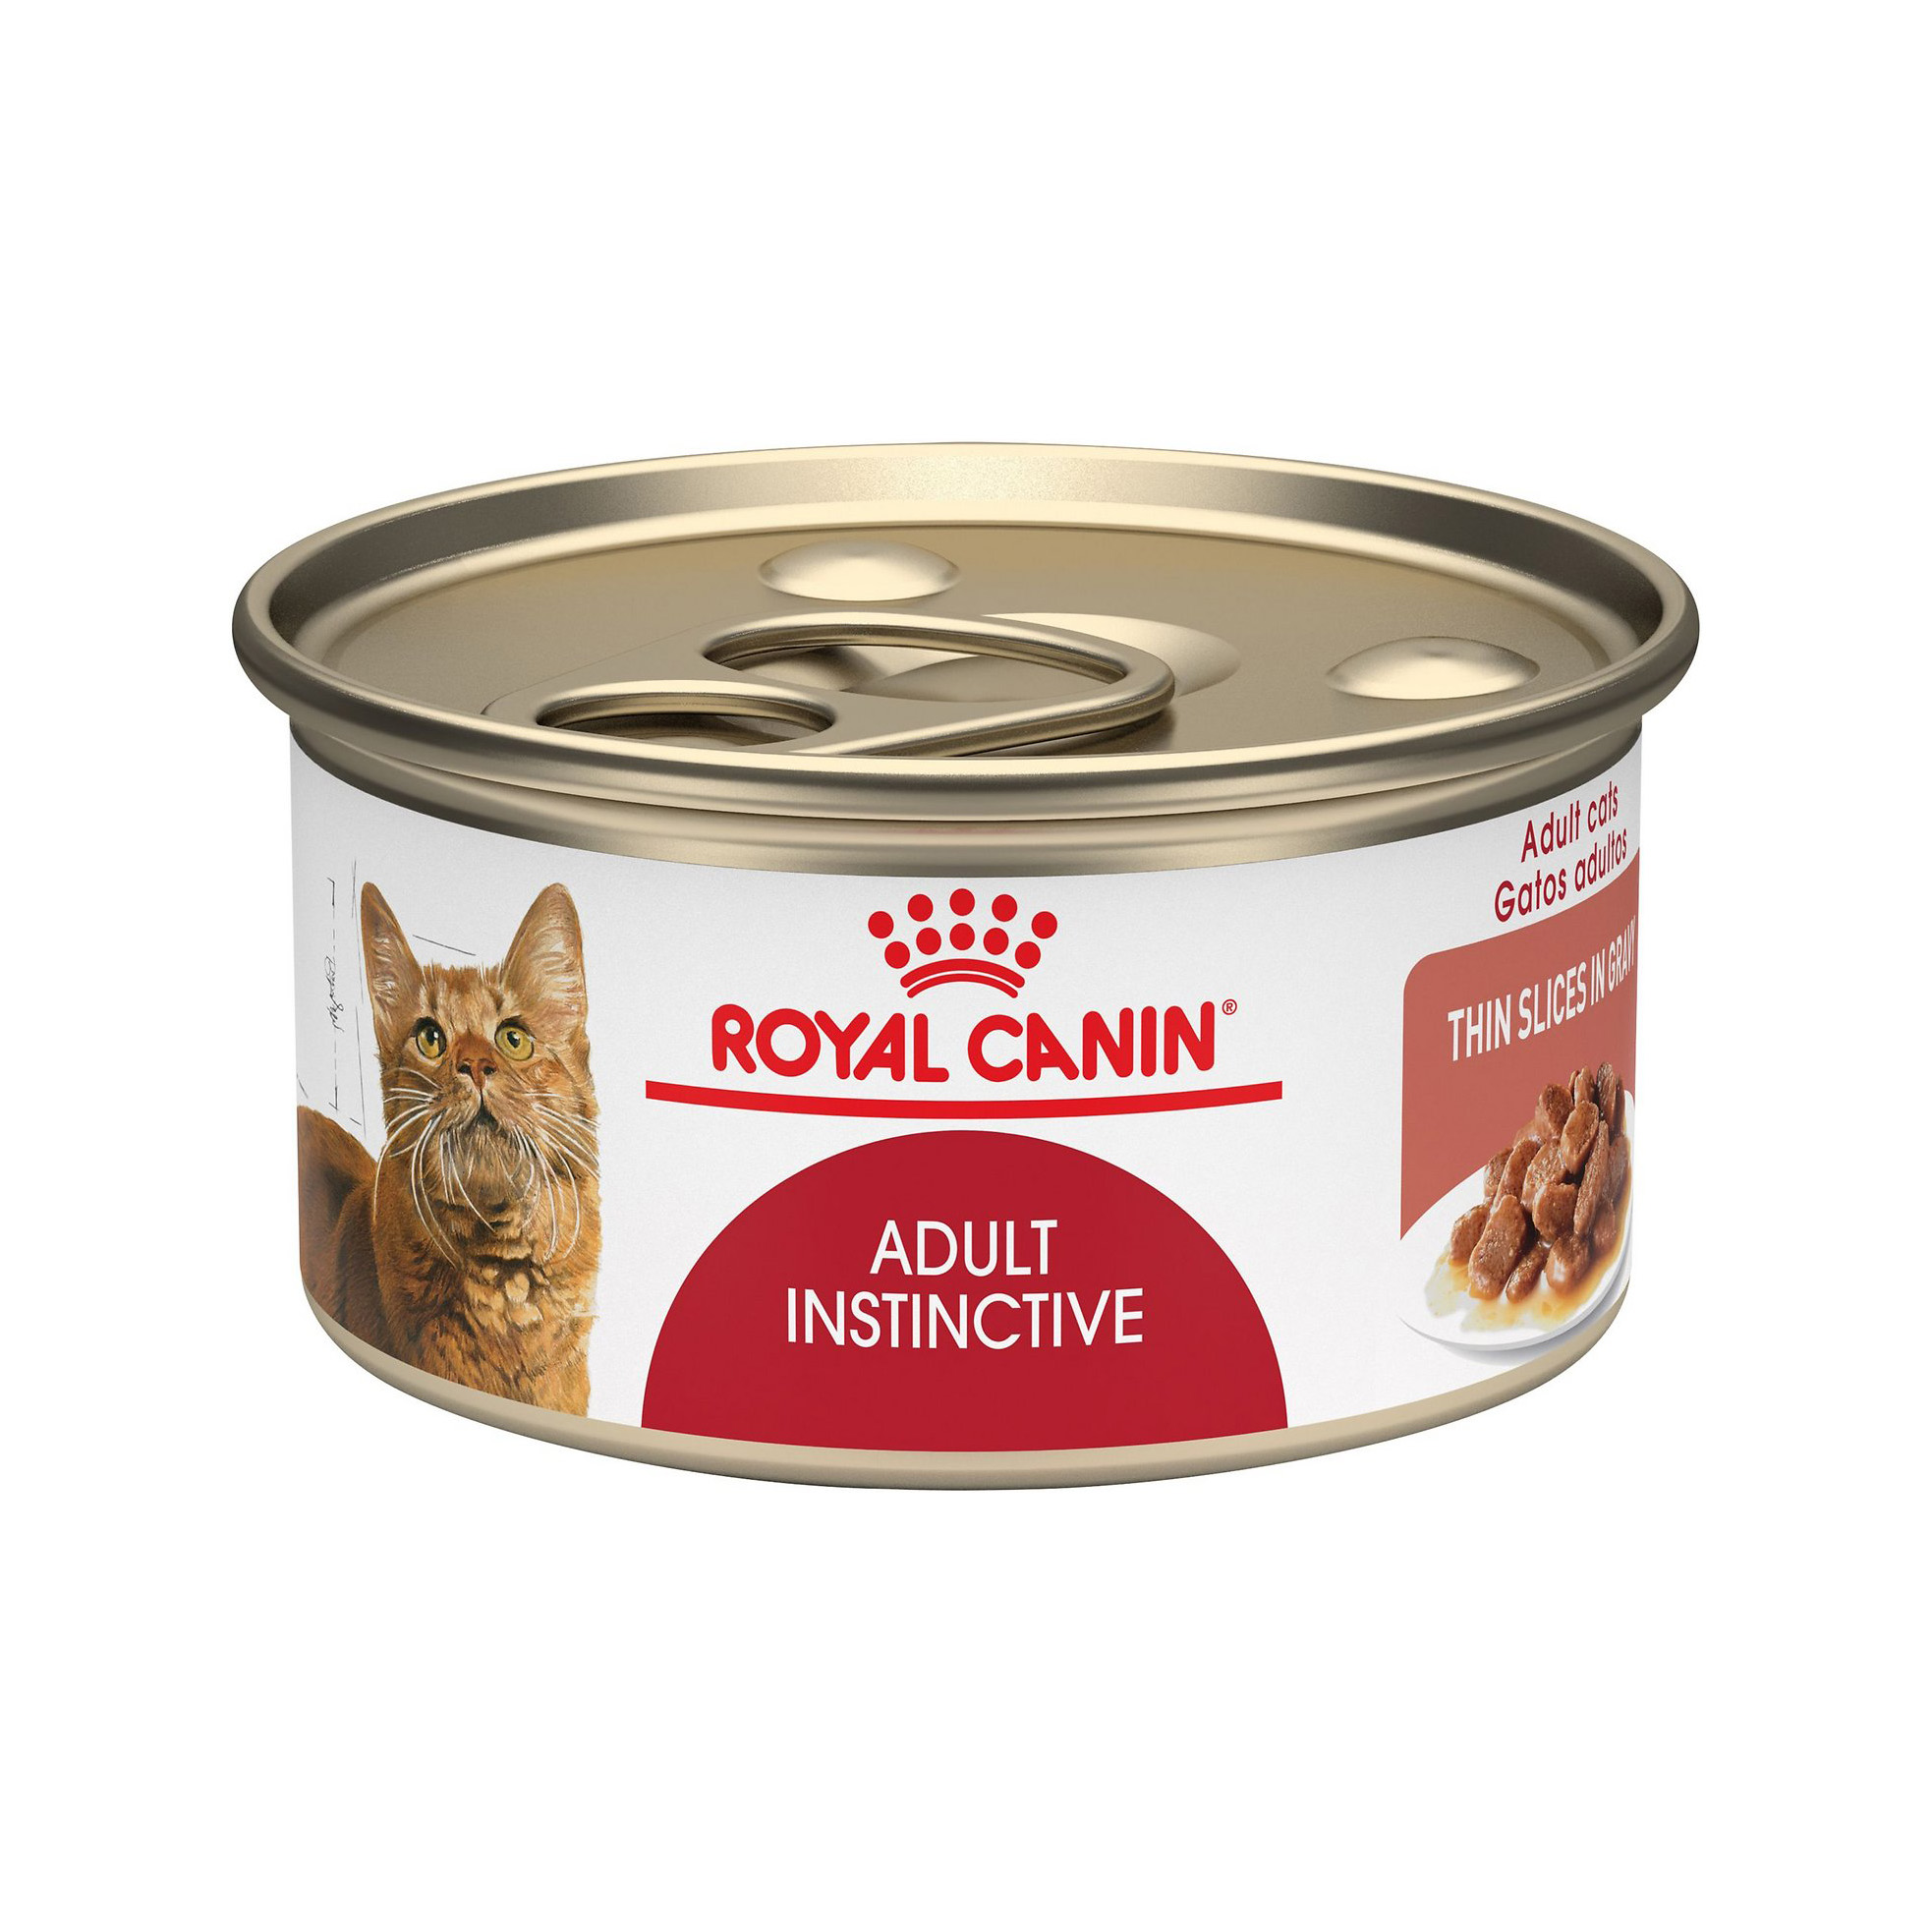 Royal Canin Adult Instinctive Thin Slices in Gravy, Canned Cat Food, 3